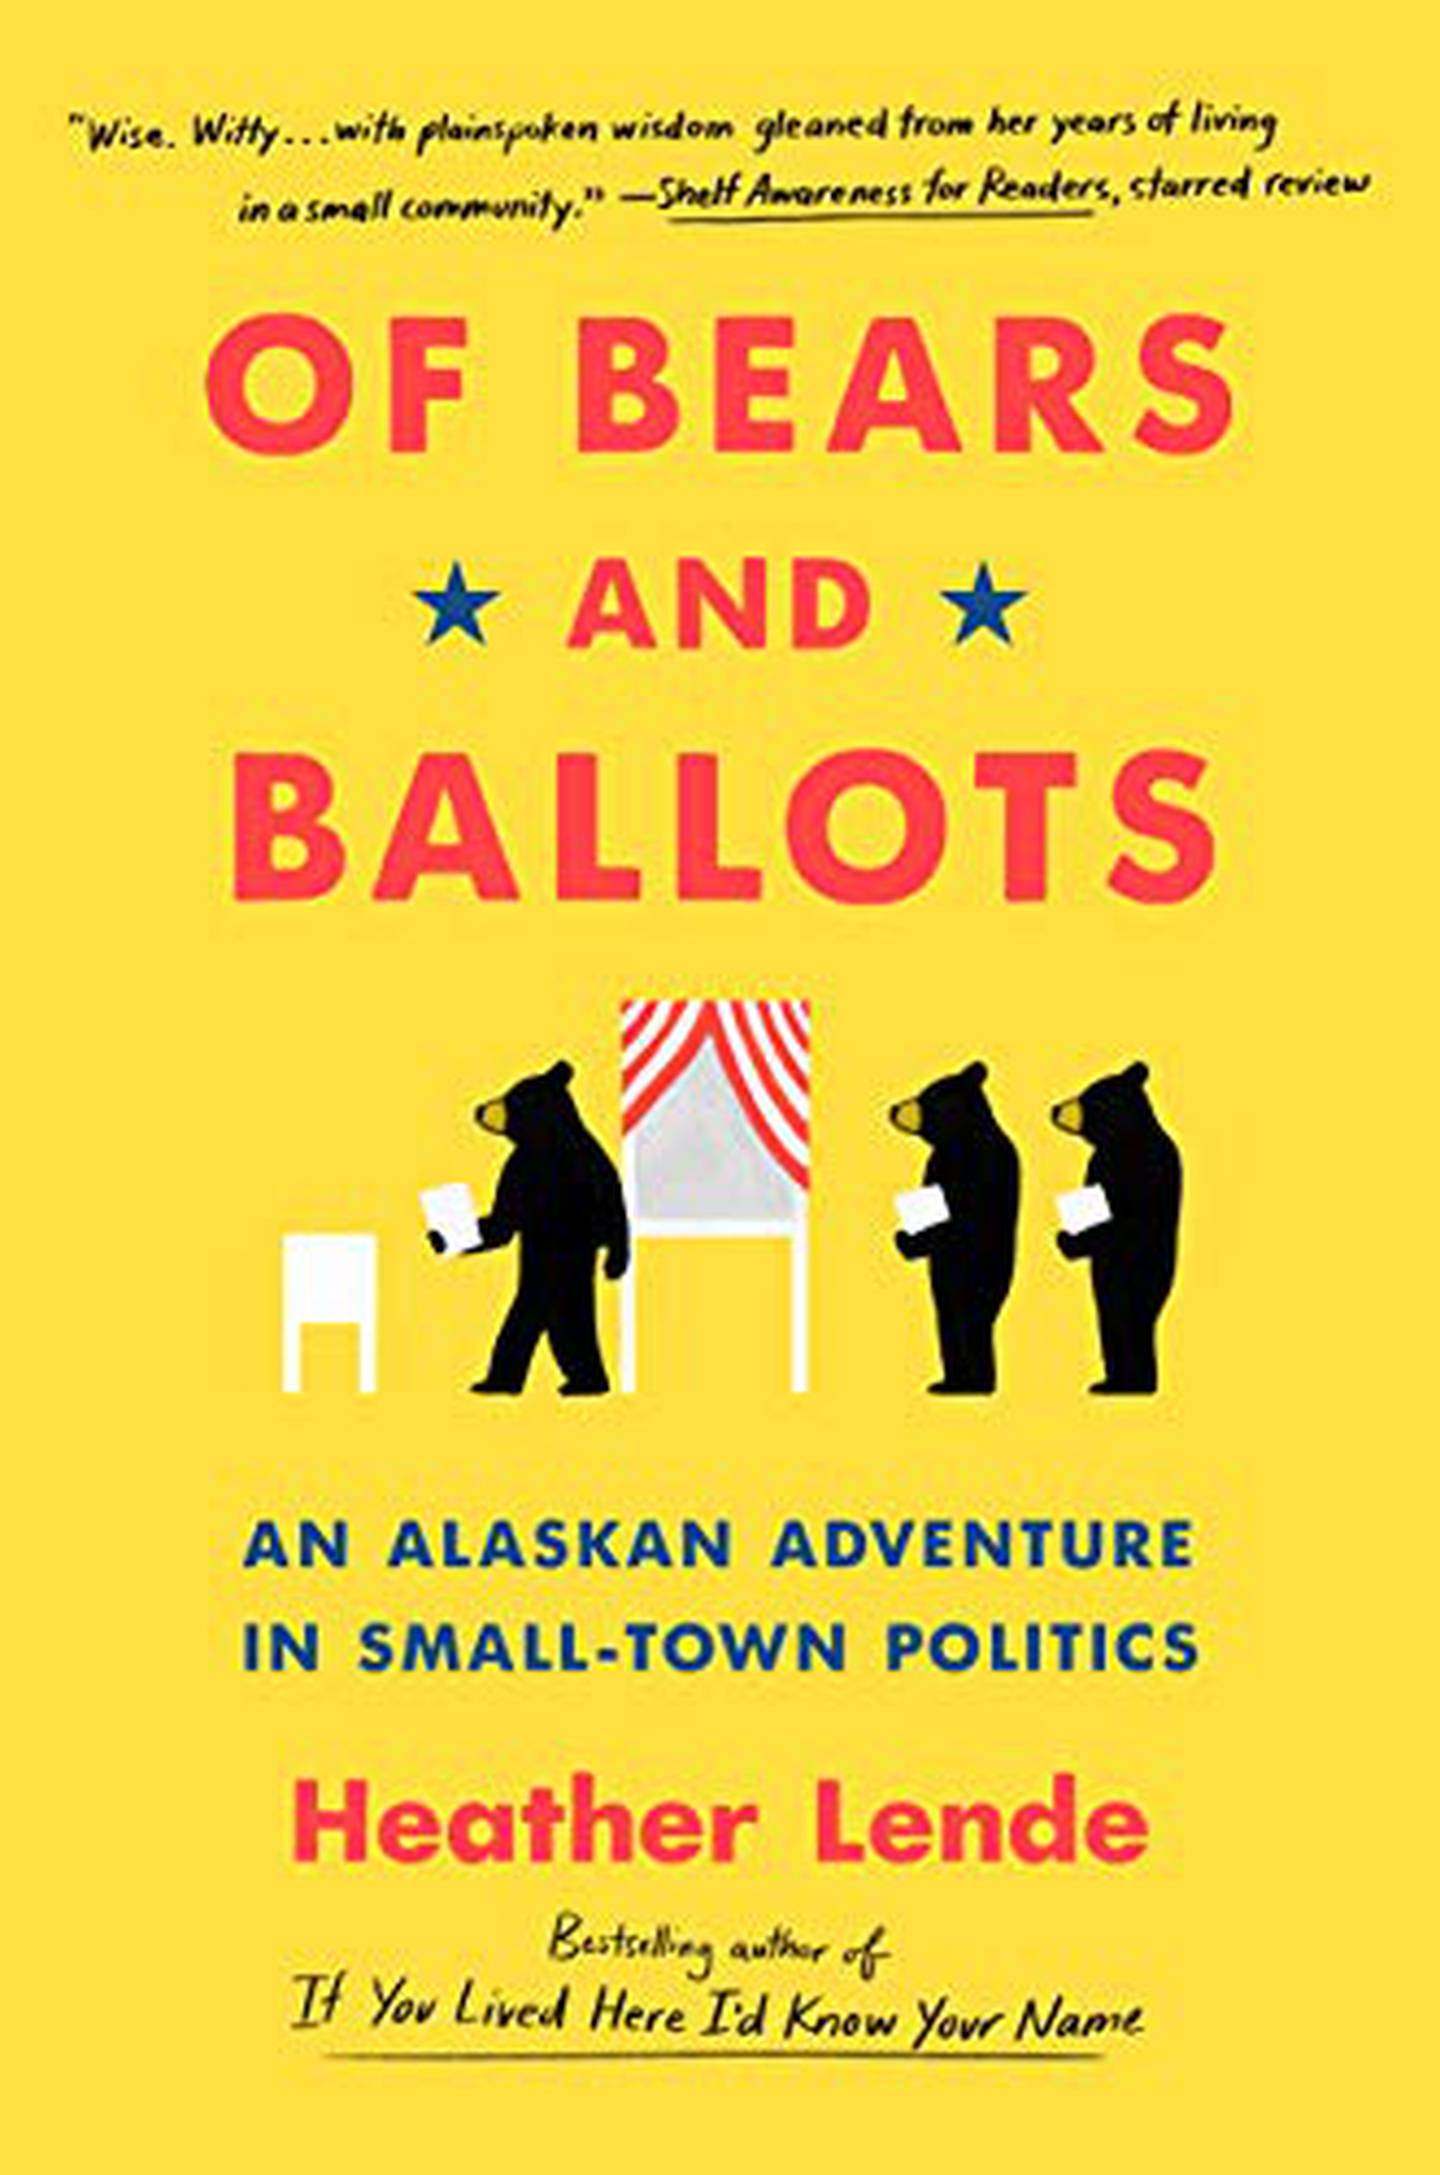 "Of Bears and Ballots: An Alaskan Adventure in Small-Town Politics"